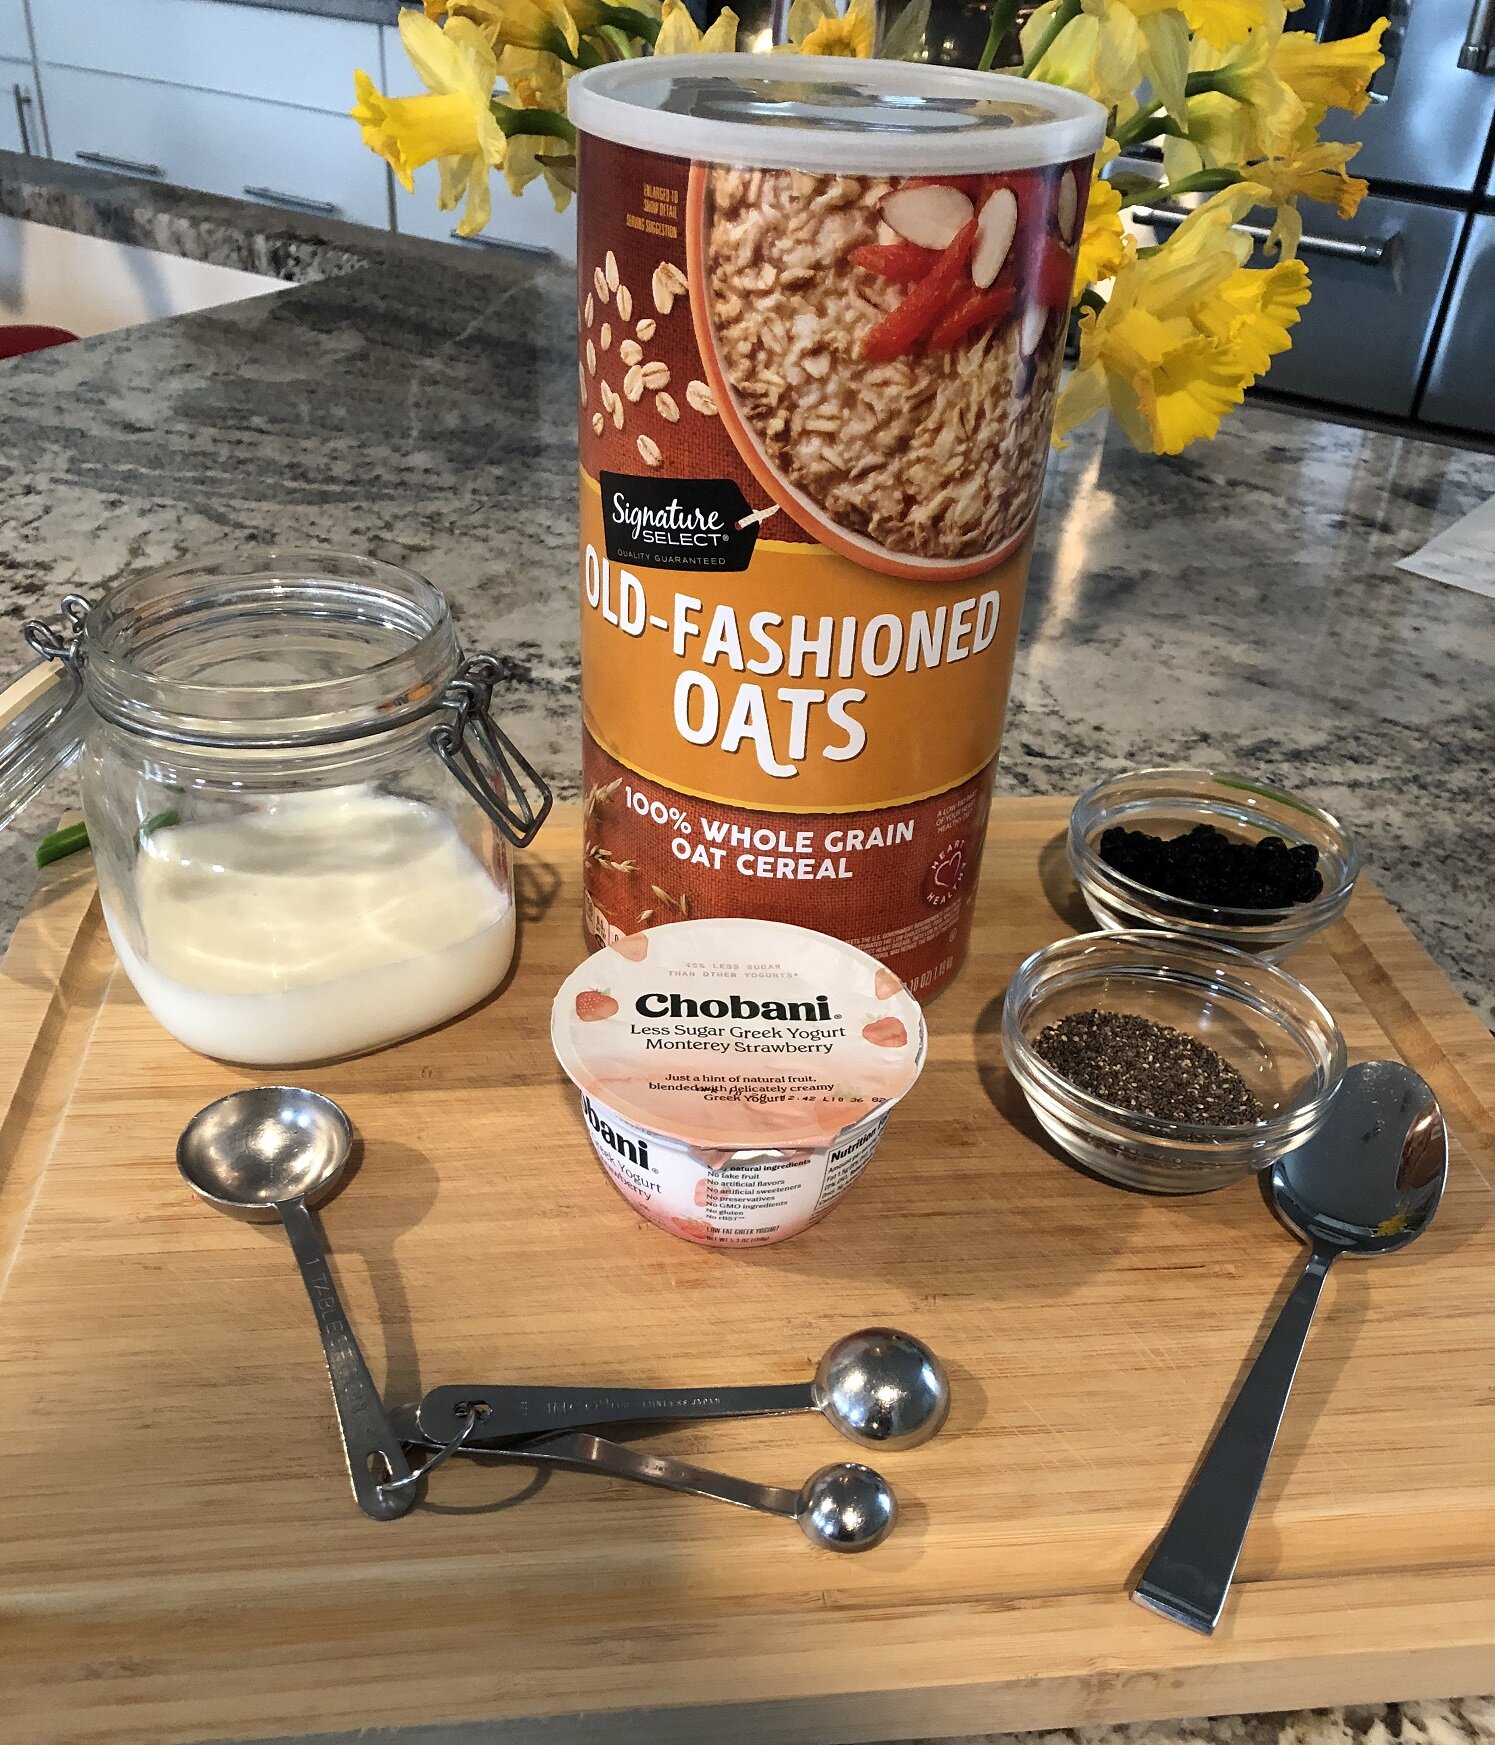 Oats Overnight oatmeal review - The Gadgeteer